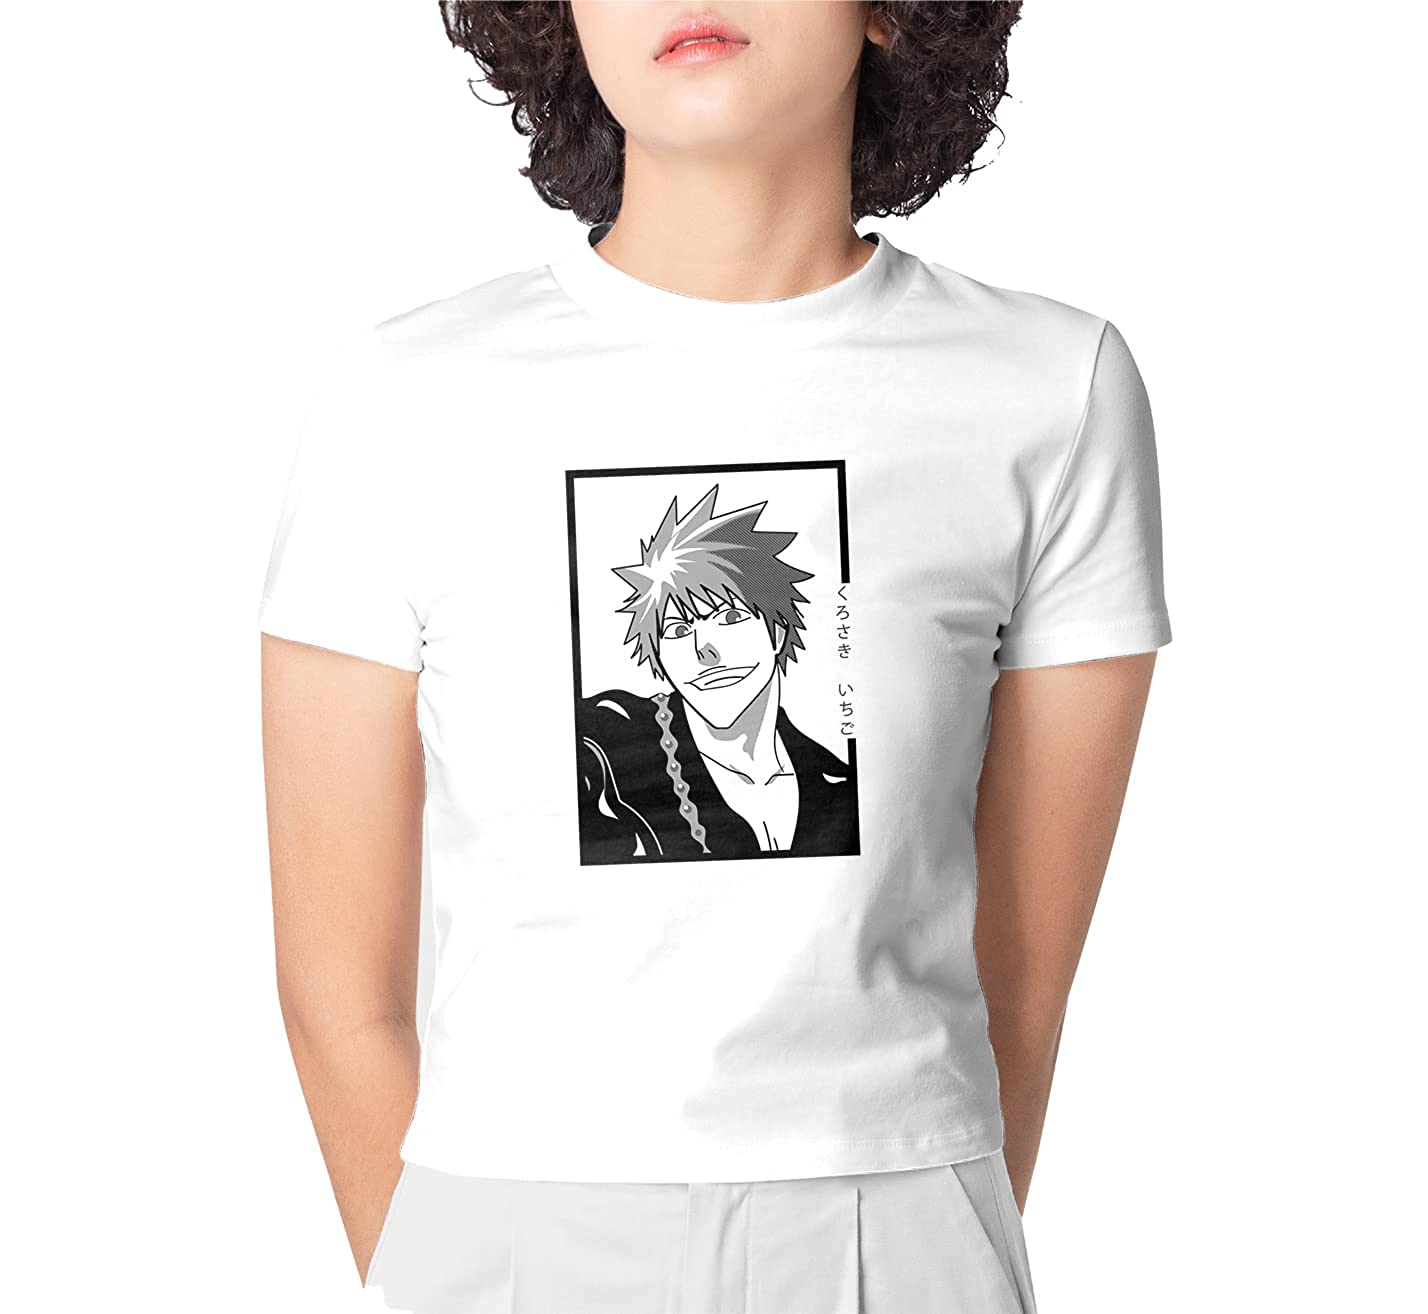 The Ultimate Bleach Shop: Get Your Hands on Exclusive Merch